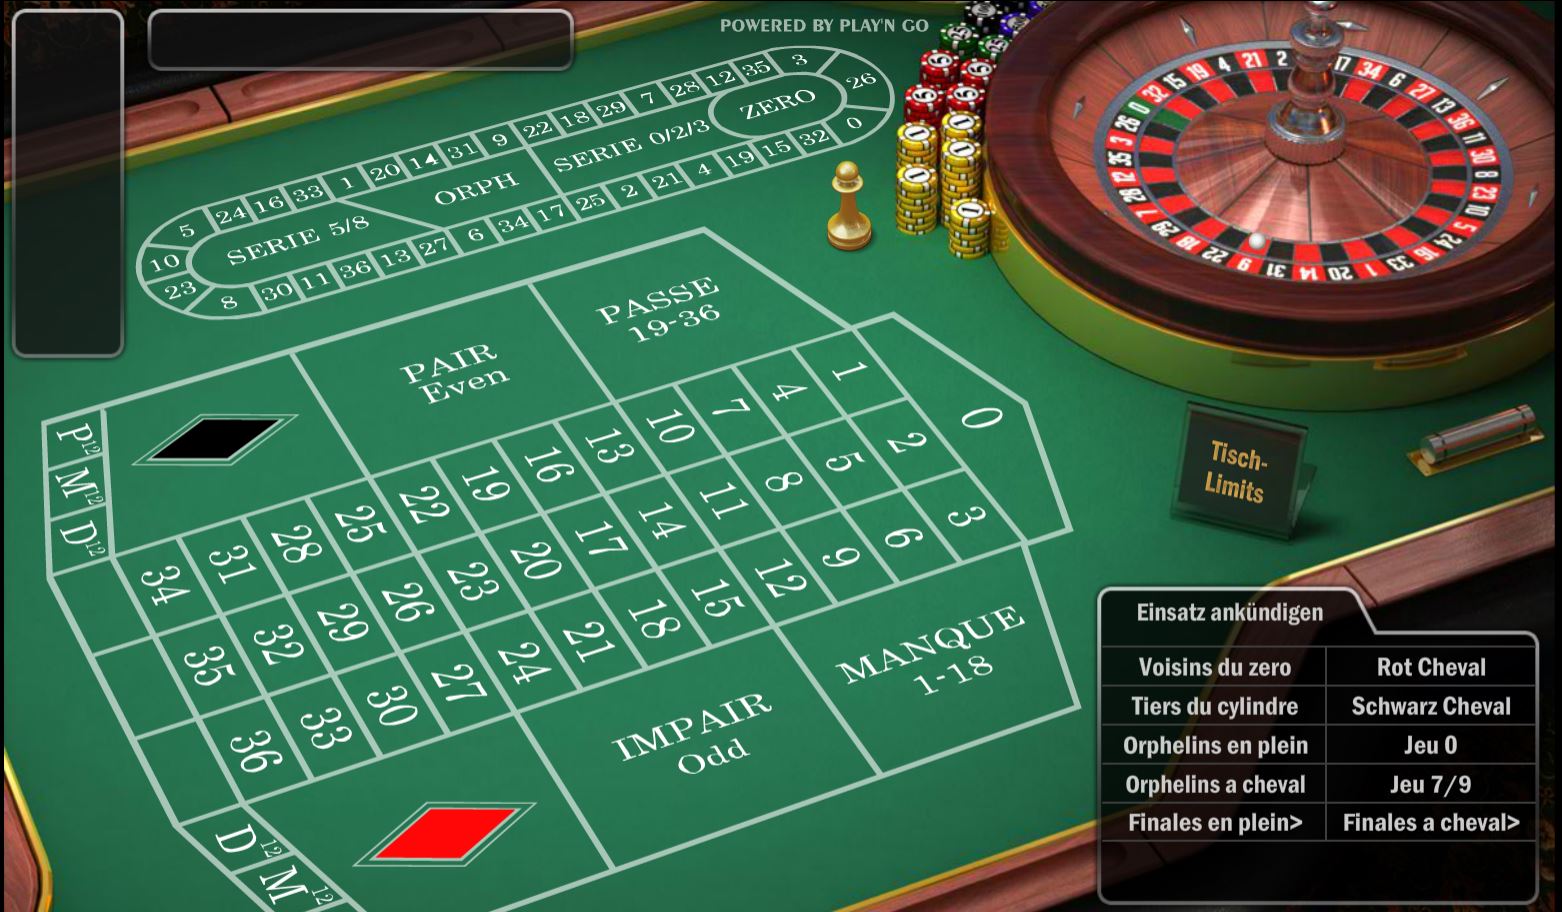 Roulette Strategie: Martingale